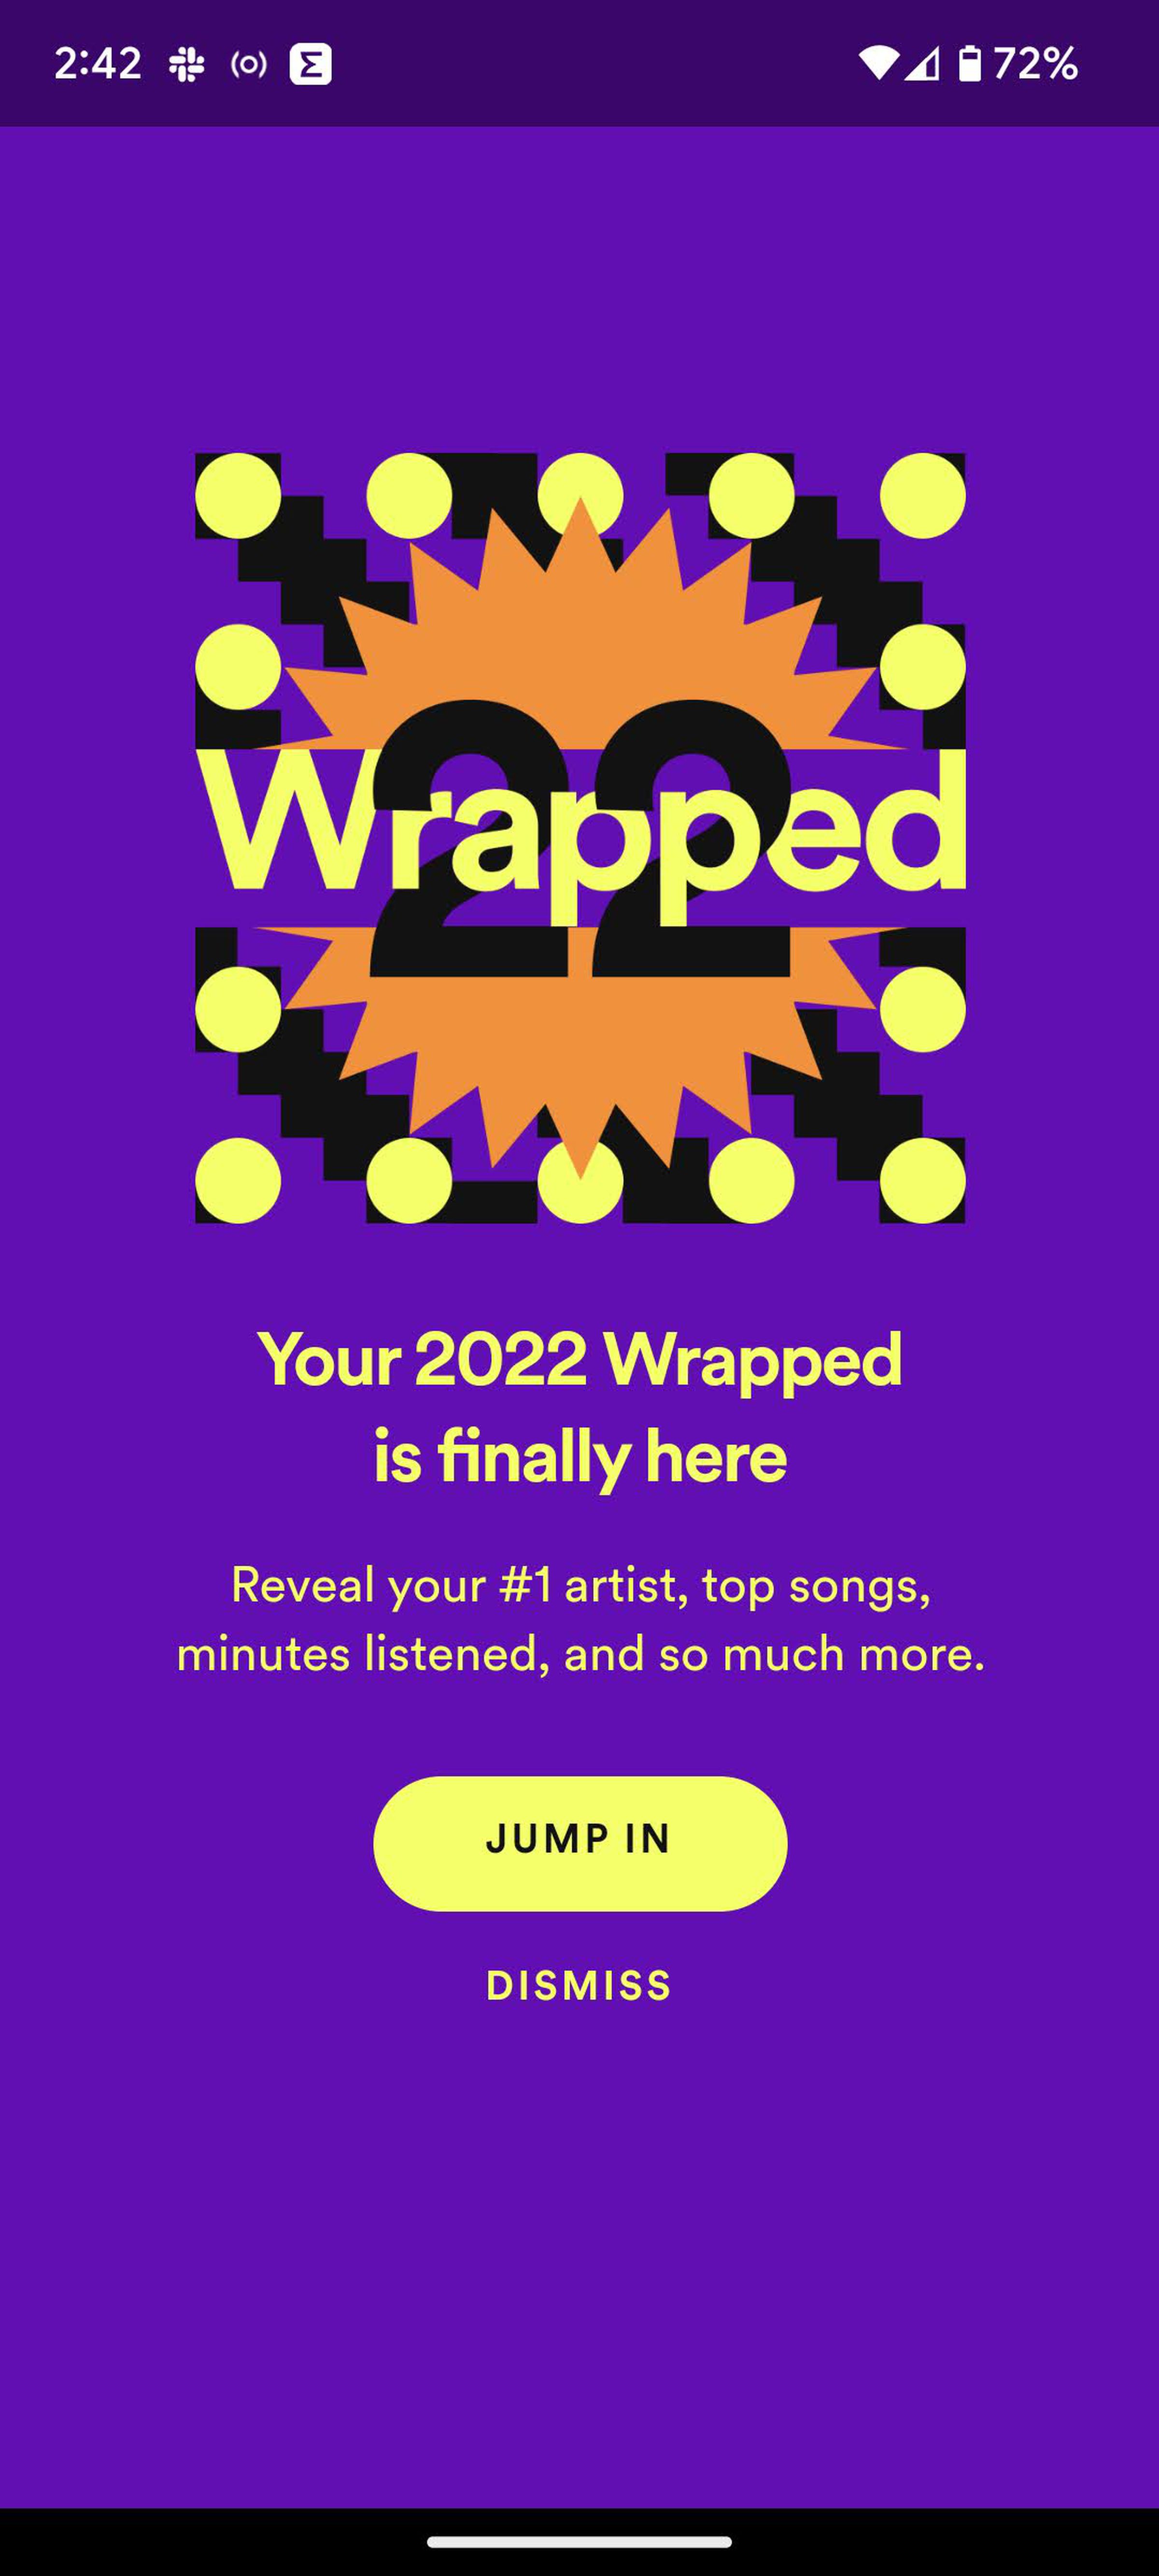 Spotify Wrapped front page saying that “Your 2022 Wrapped is finally here” with an orange sunburst against a purple background, and a link titled “Jump In.”